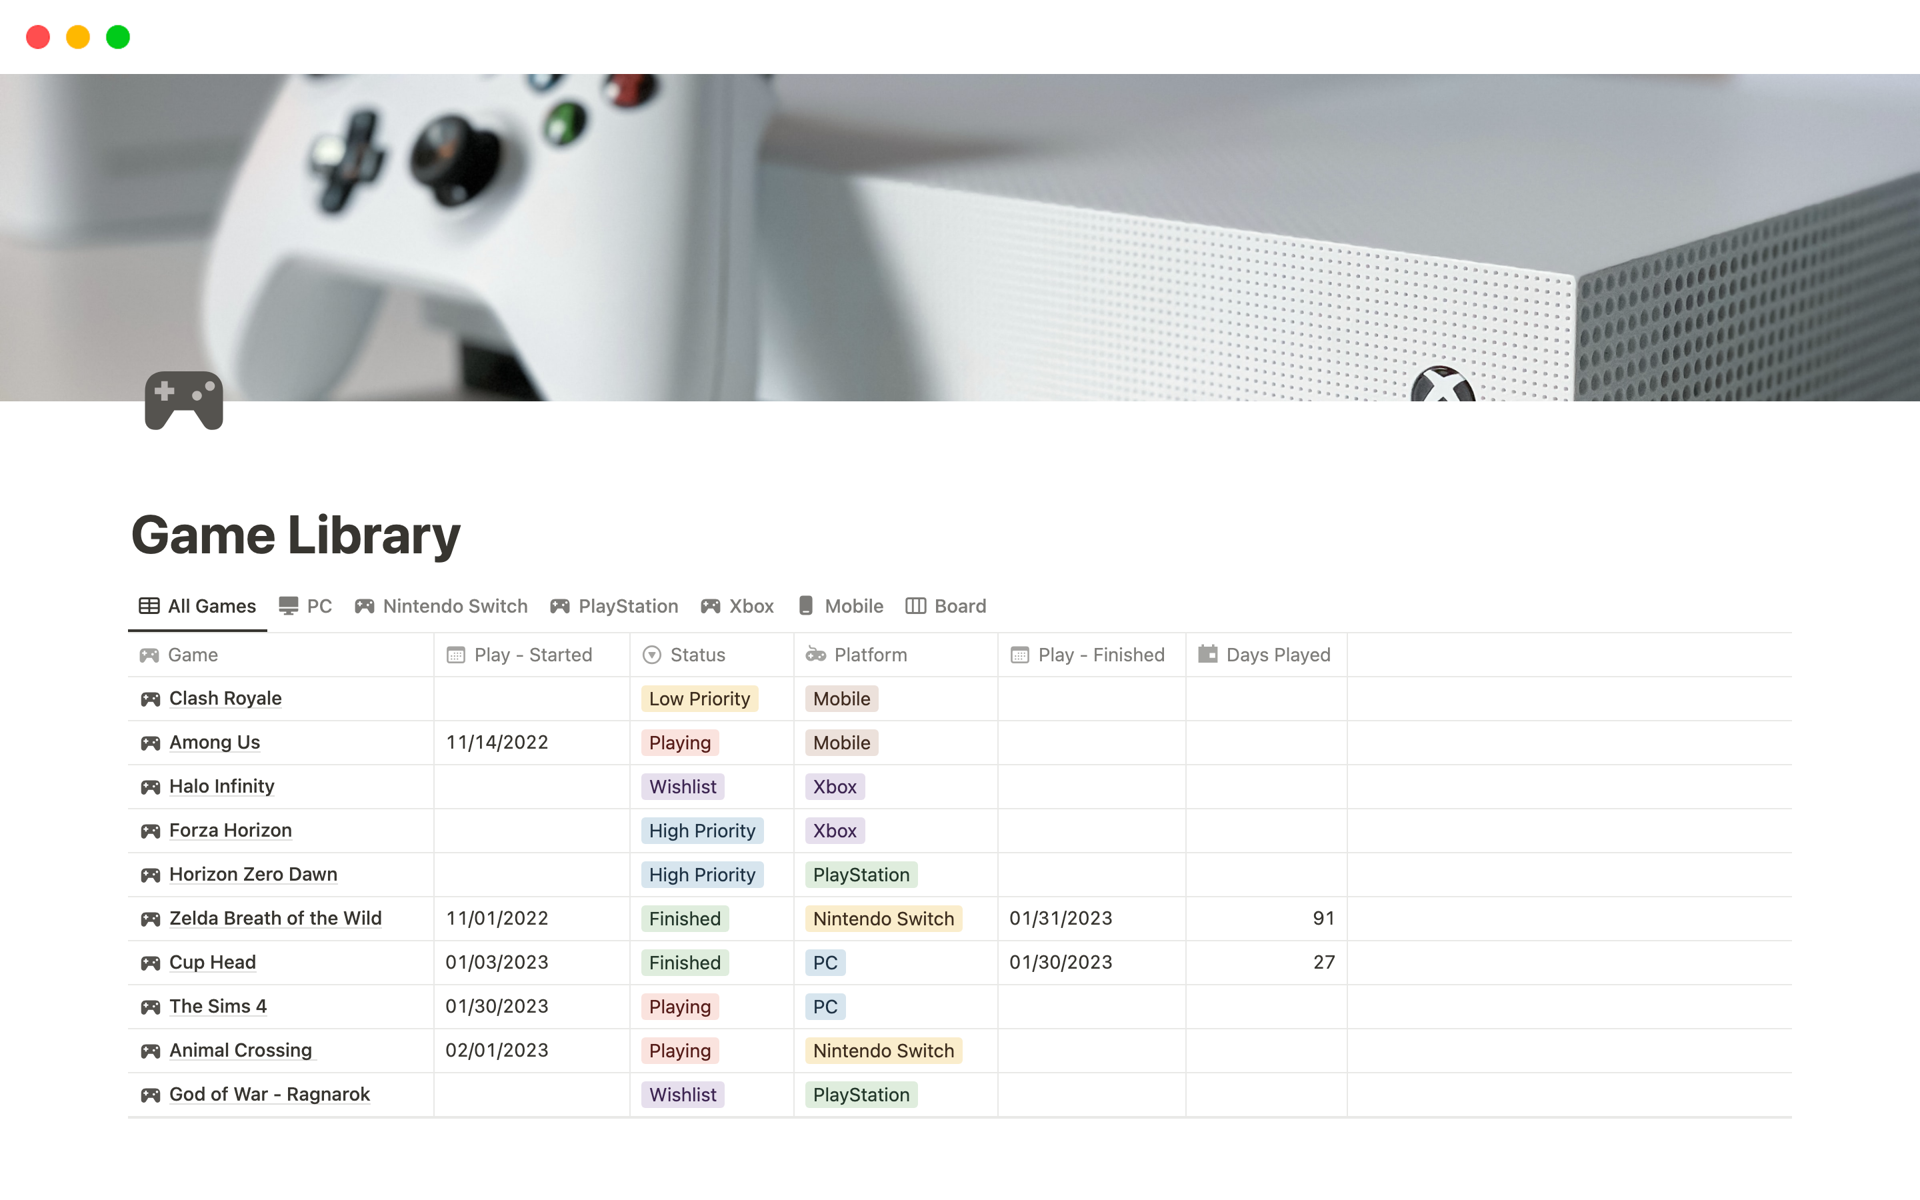 Control your game library, all games cataloger by platform, know when you started a game, how long you are playing, set priorities, wish lists, and you can include more features you need!

Dark and Light Mode Available!